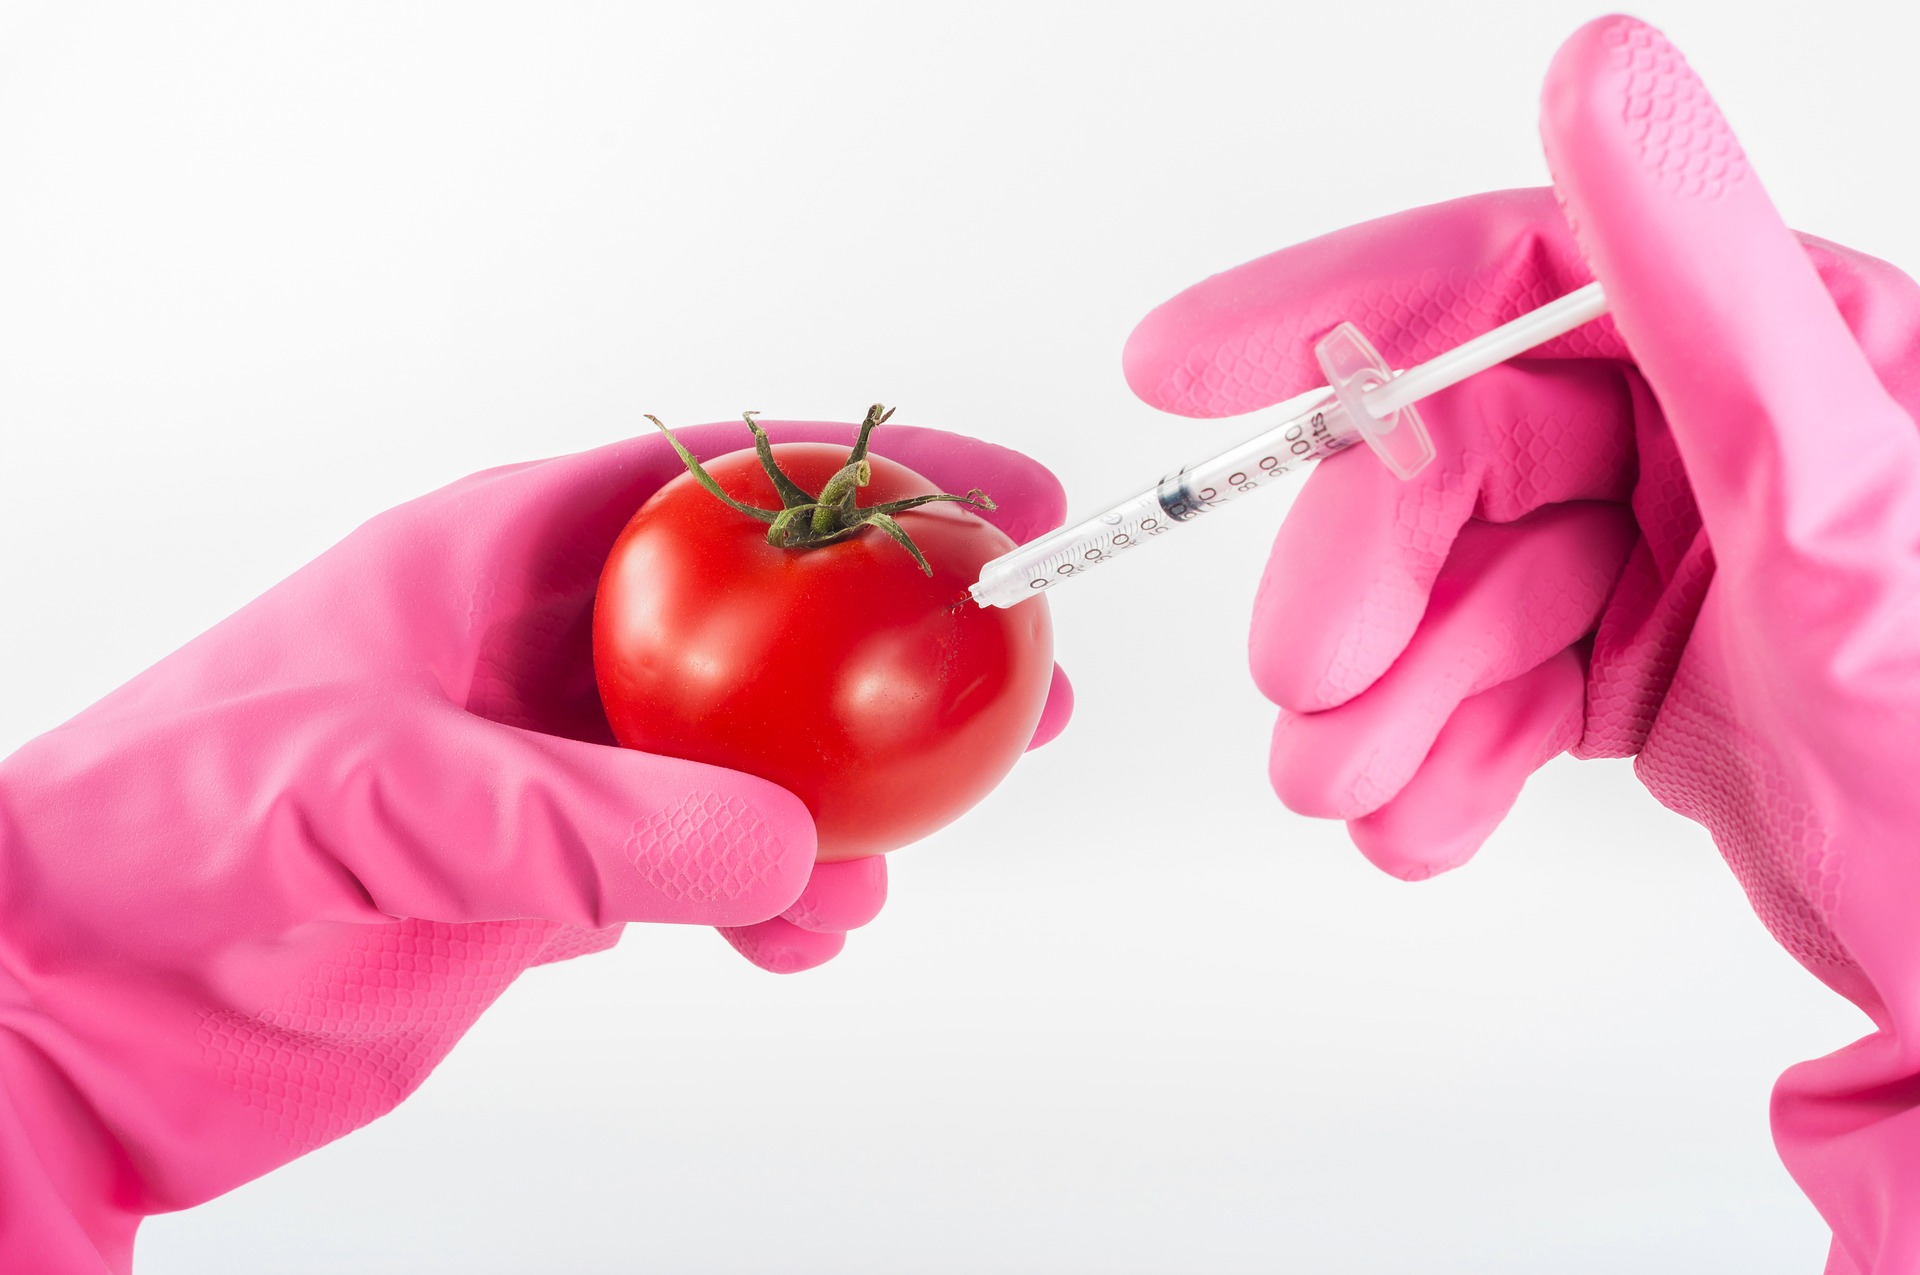 Let’s talk about Genetically Modified Food